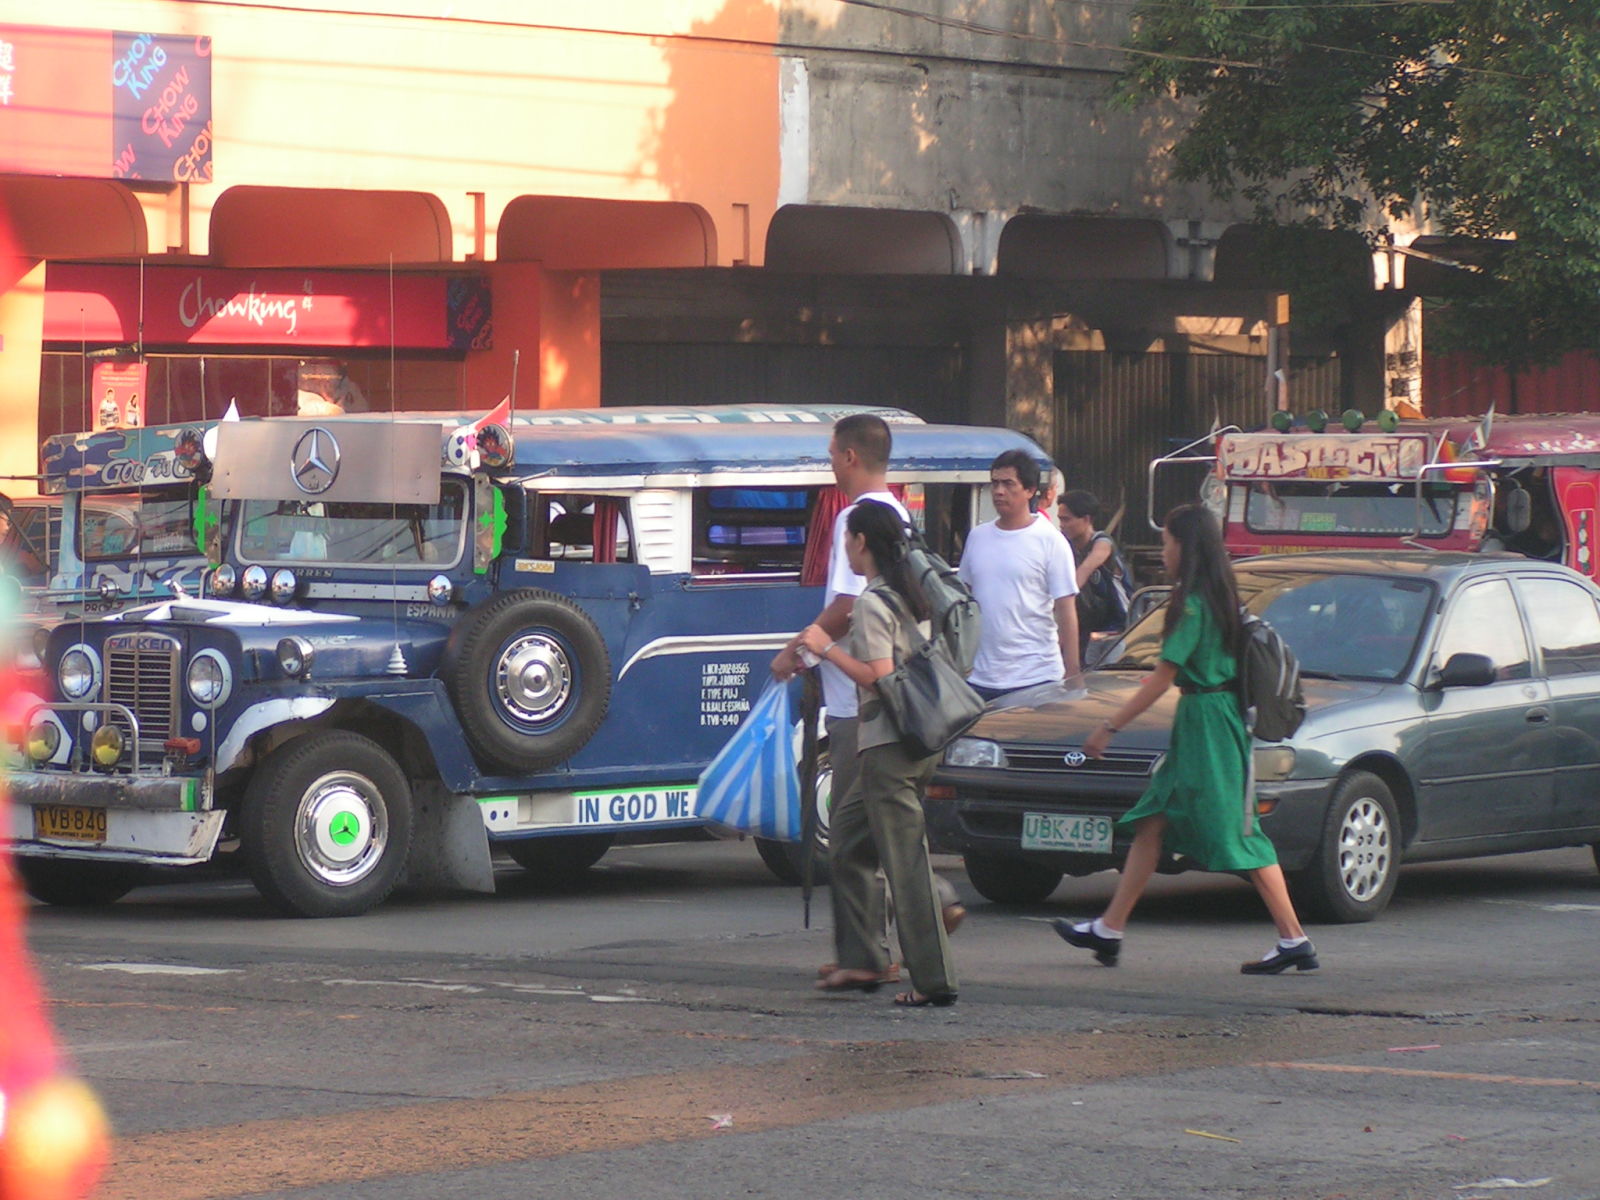 A jeepney with Mercedes hubcaps and a logo above the windshield. I wonder if it comes with a Mercedes engine as well. An AMG perhaps?